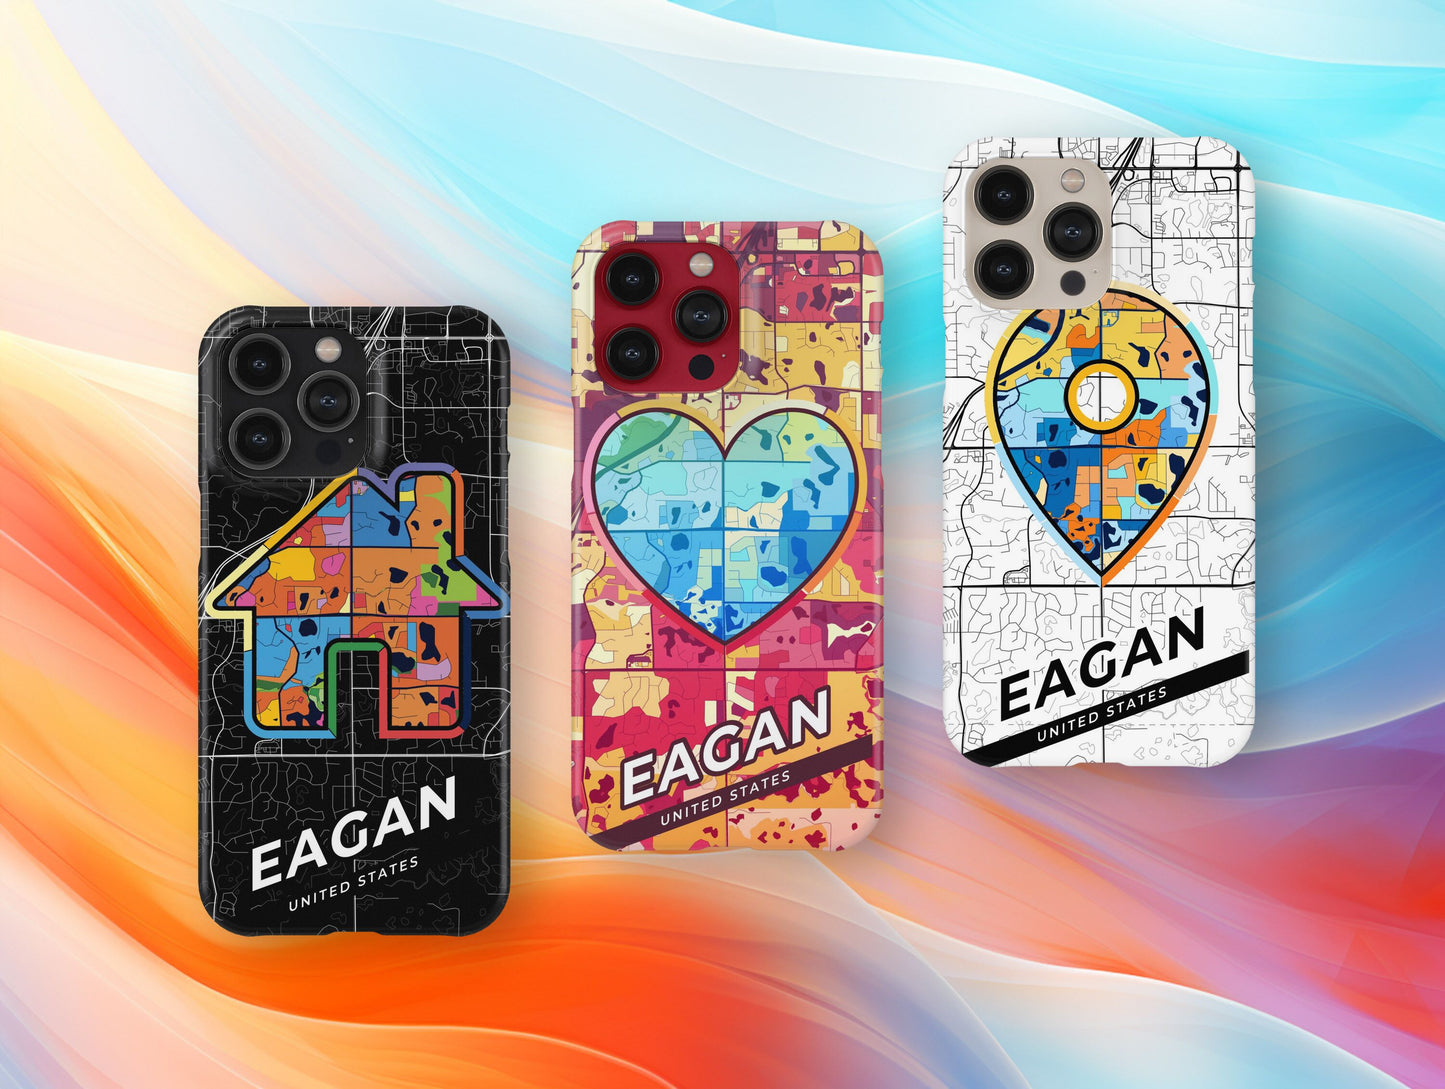 Eagan Minnesota slim phone case with colorful icon. Birthday, wedding or housewarming gift. Couple match cases.